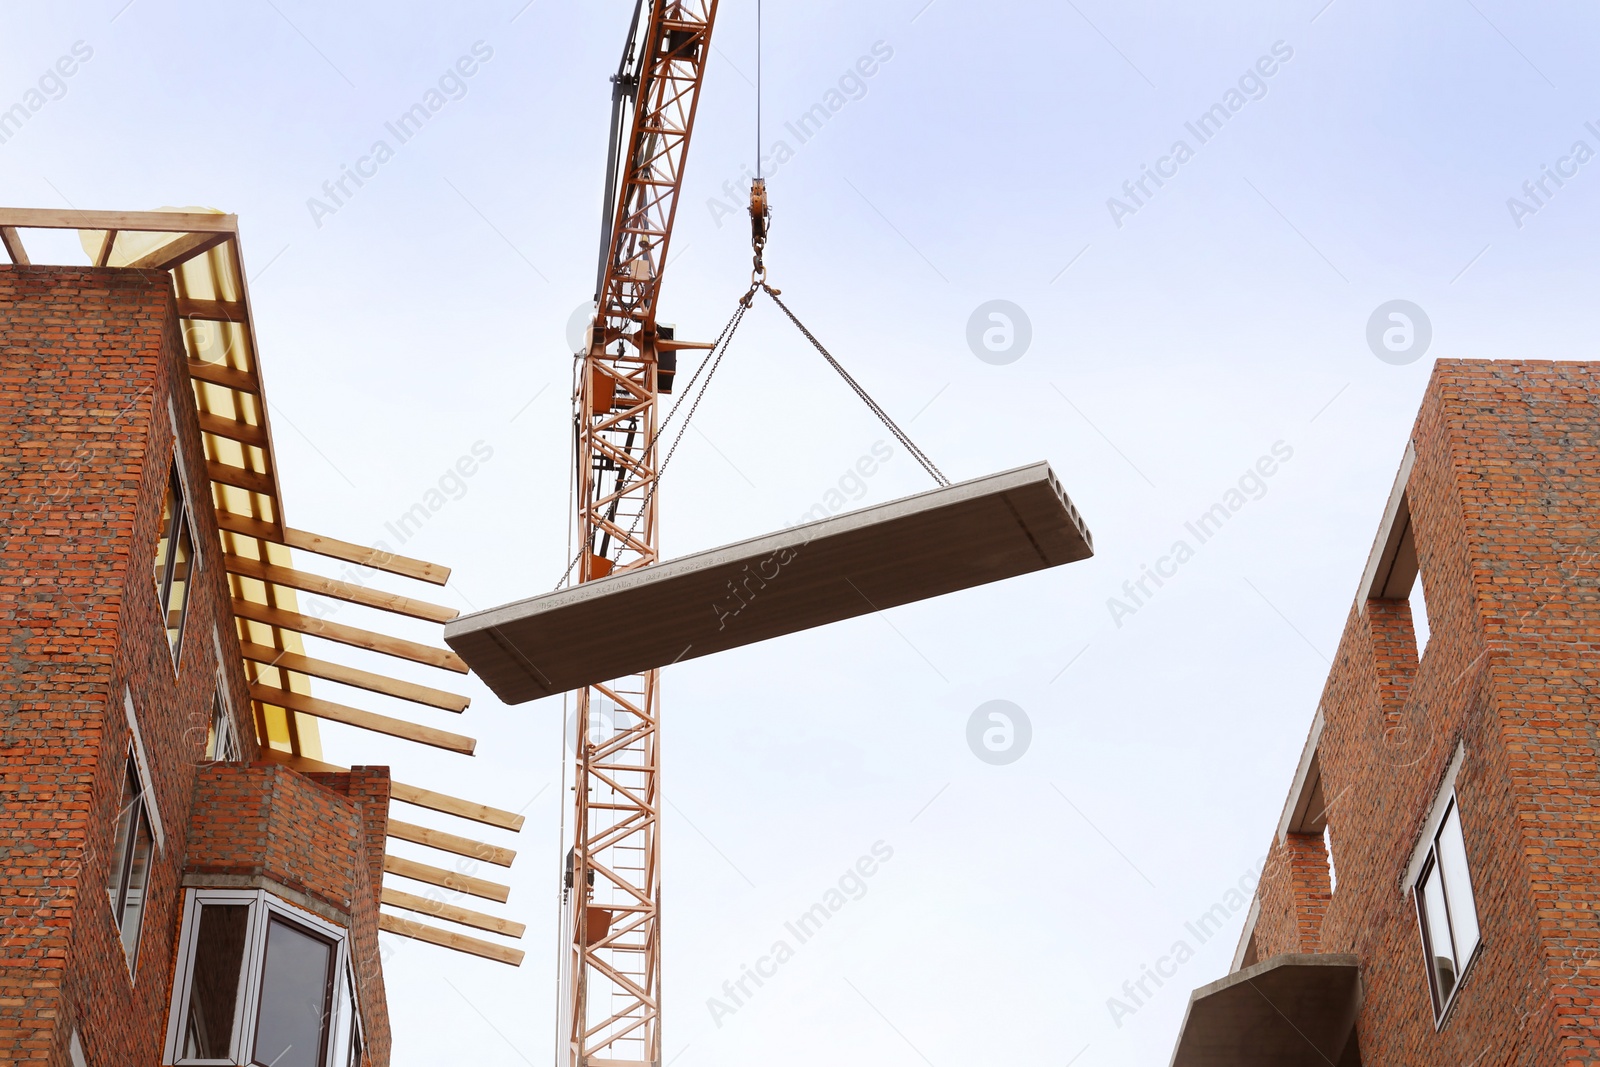 Photo of Construction site with tower crane near unfinished buildings, low angle view